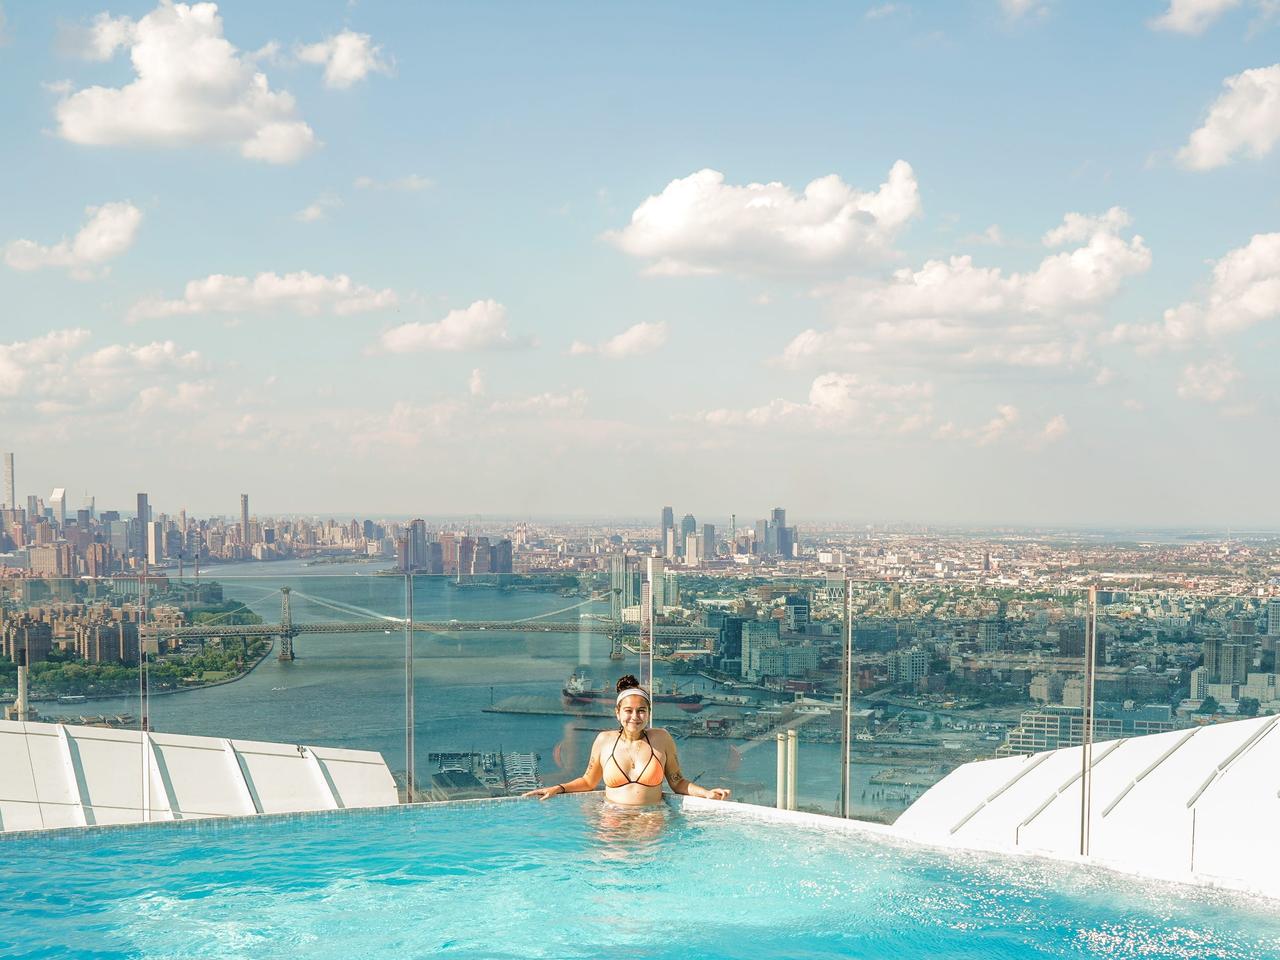 I swam on top of Brooklyn Point, the tallest residential building in the borough.